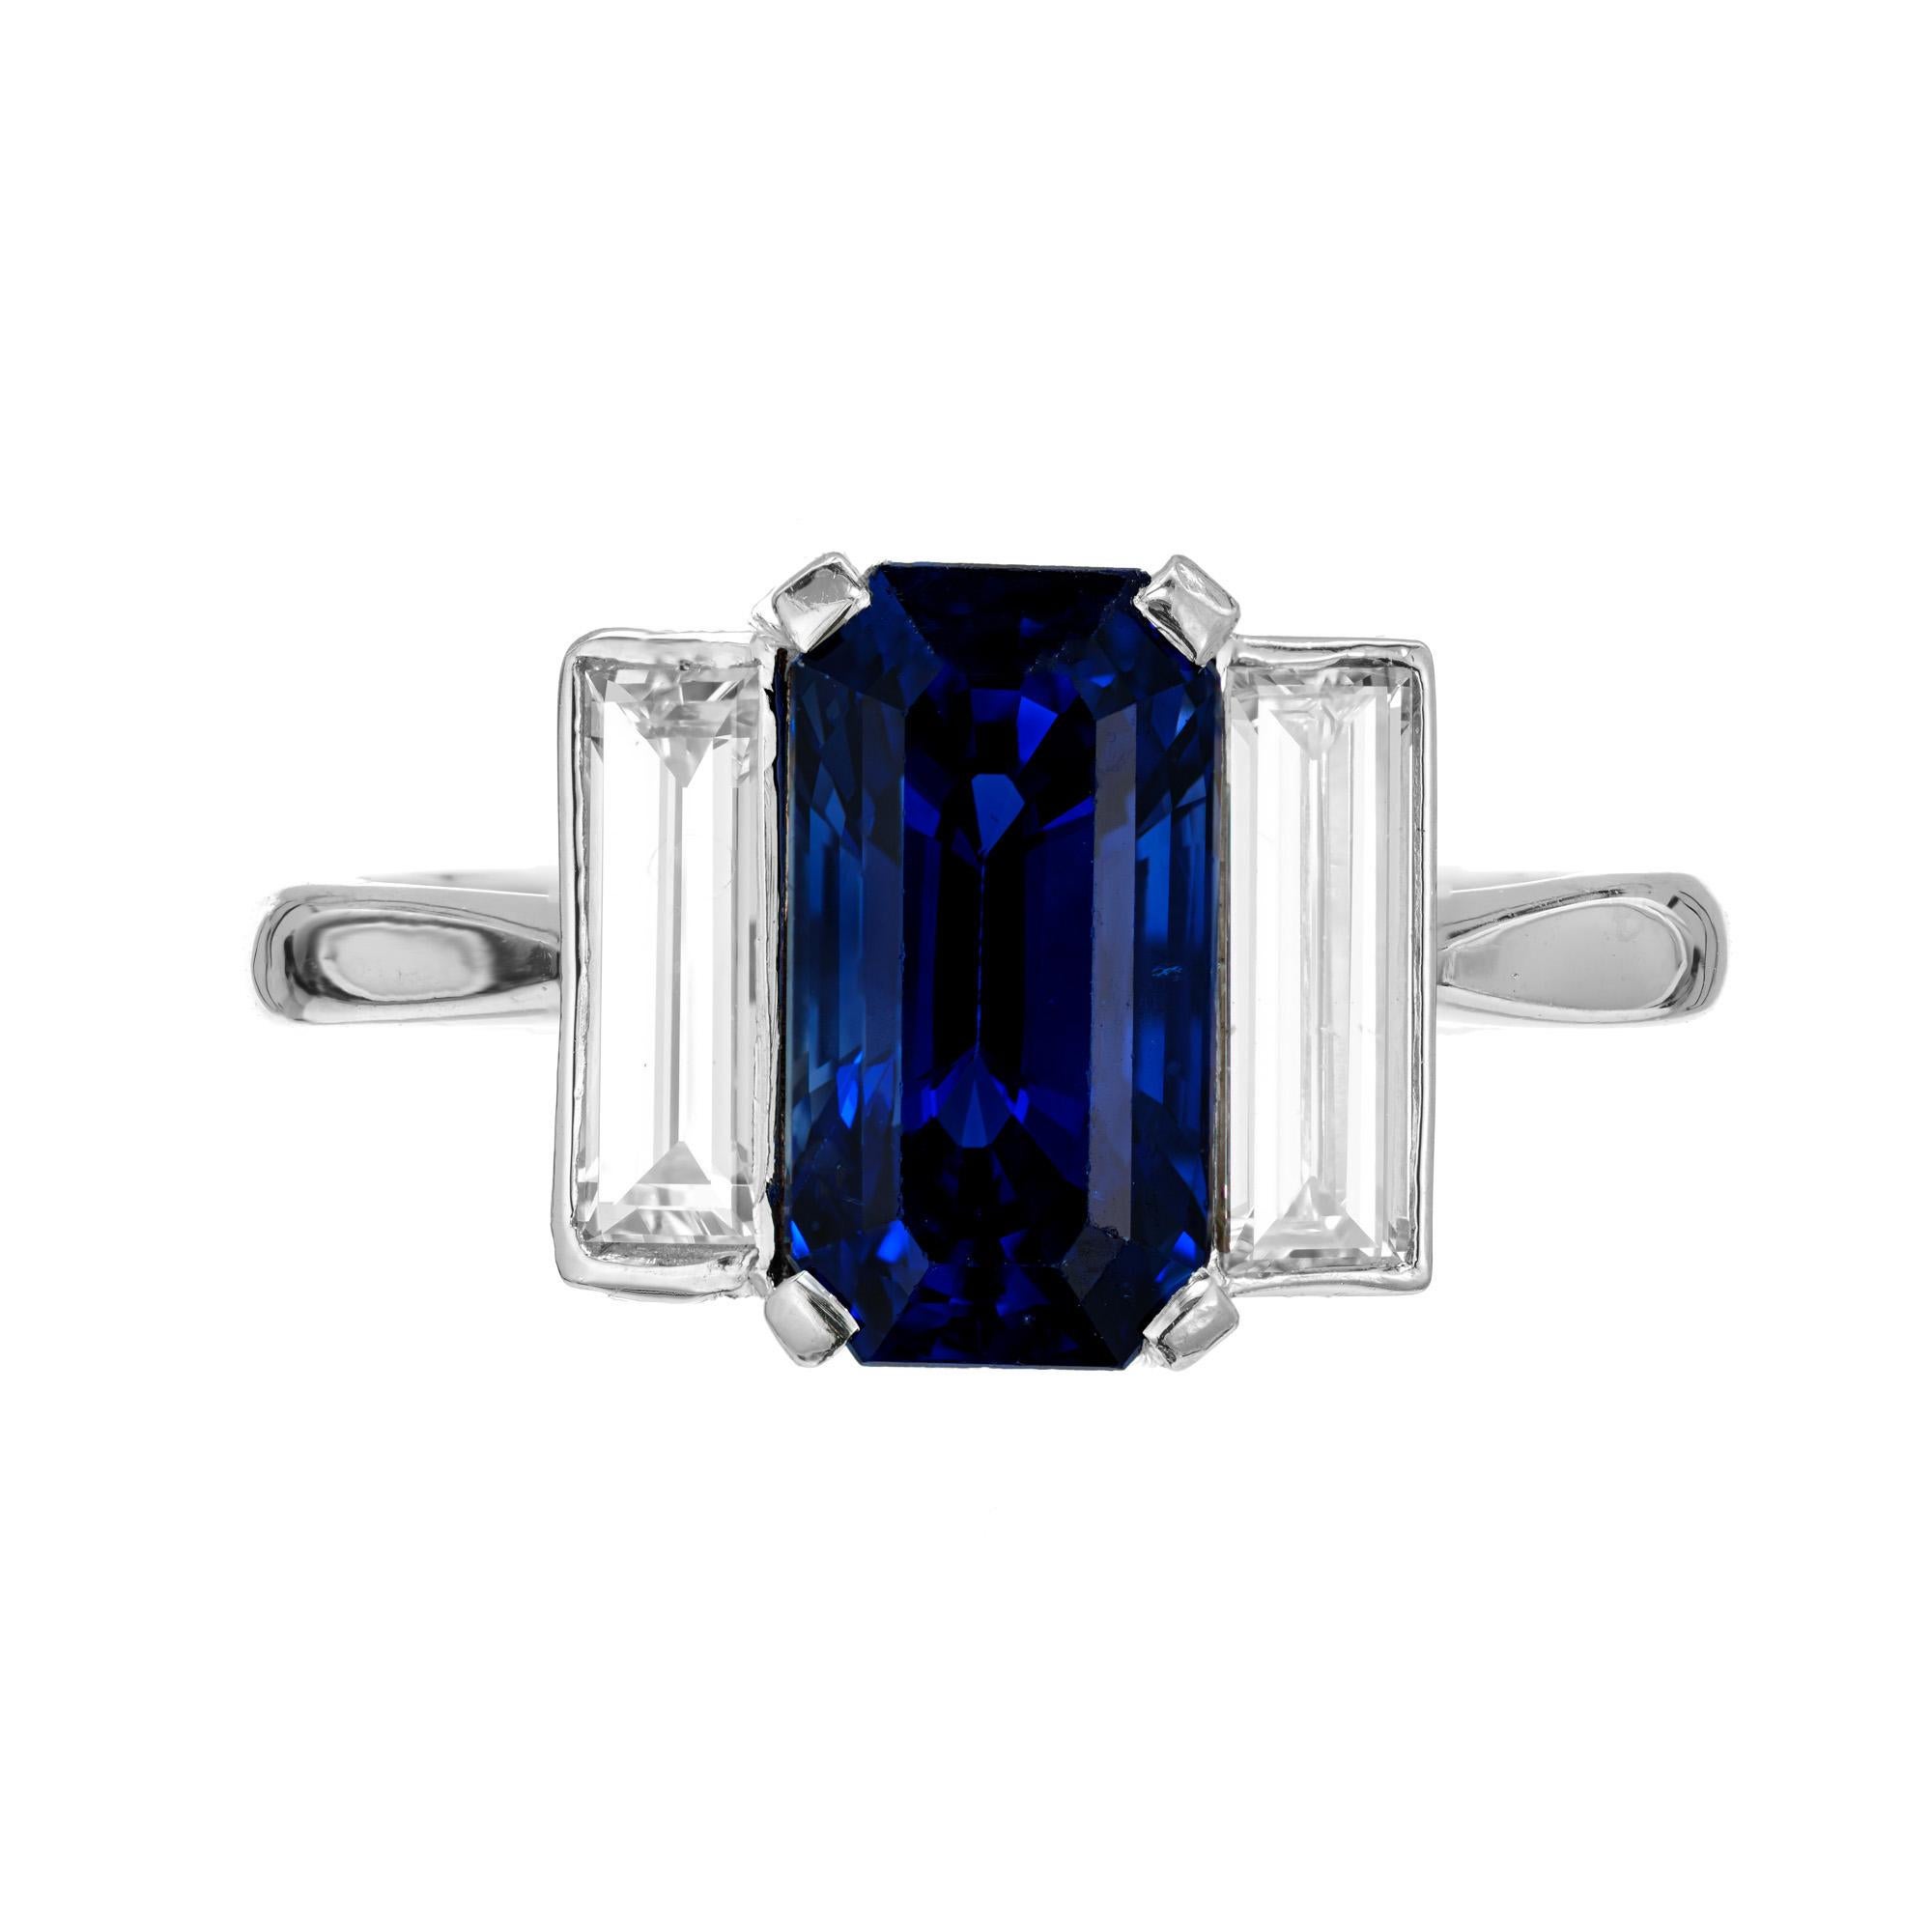 Original 1920's distinctive Art Deco Ceylon Sapphire diamond engagement ring. AGL certified emerald cut 3.16ct center sapphire. Set in a platinum three-stone setting with two matching emerald cut accent diamonds. Simple heat only. 

1 natural